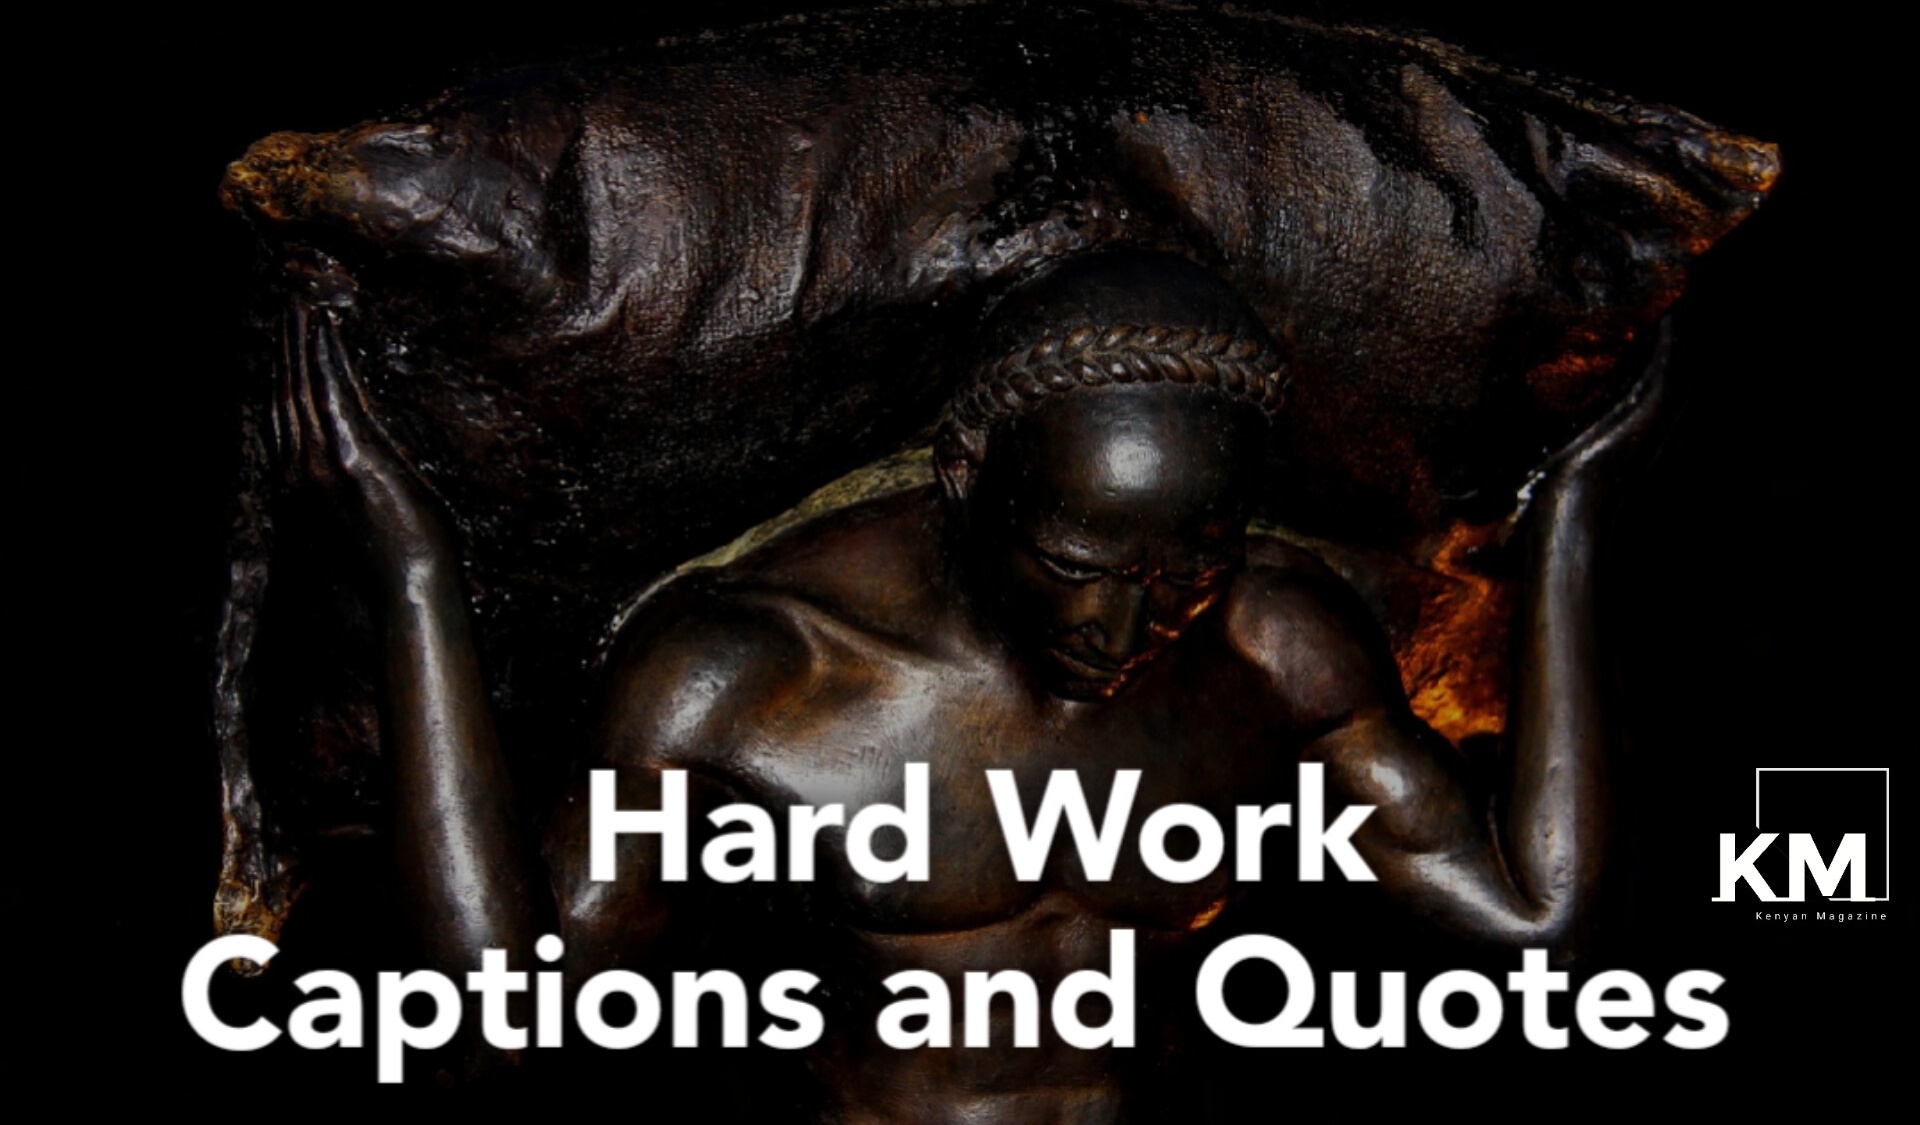 Hard work captions and quotes